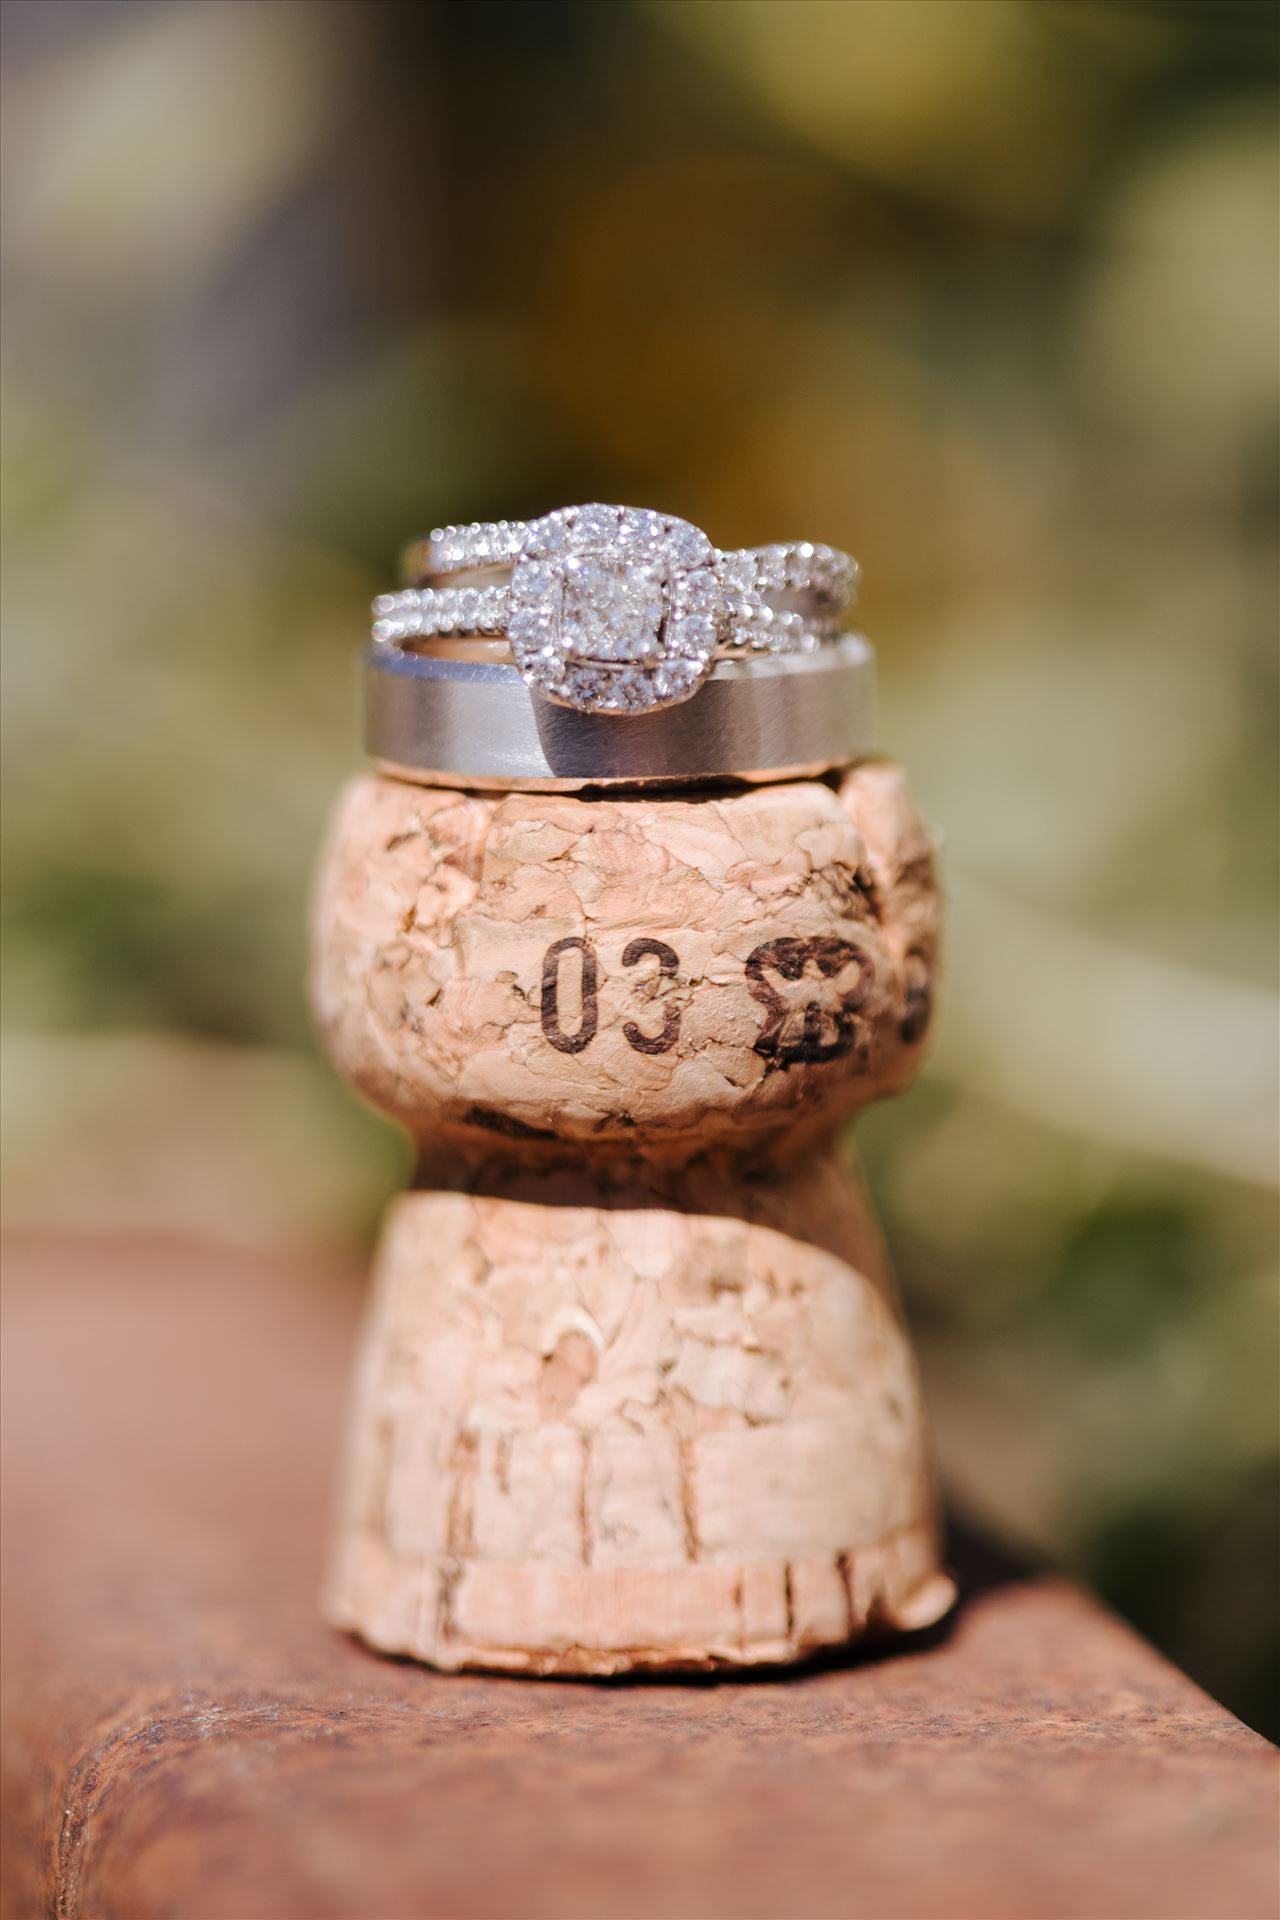 _Y9A6475.JPG - Tooth and Nail Winery elegant and formal wedding in Paso Robles California wine country by Mirror's Edge Photography, San Luis Obispo County Wedding Photographer. Wedding rings on wine cork by Sarah Williams